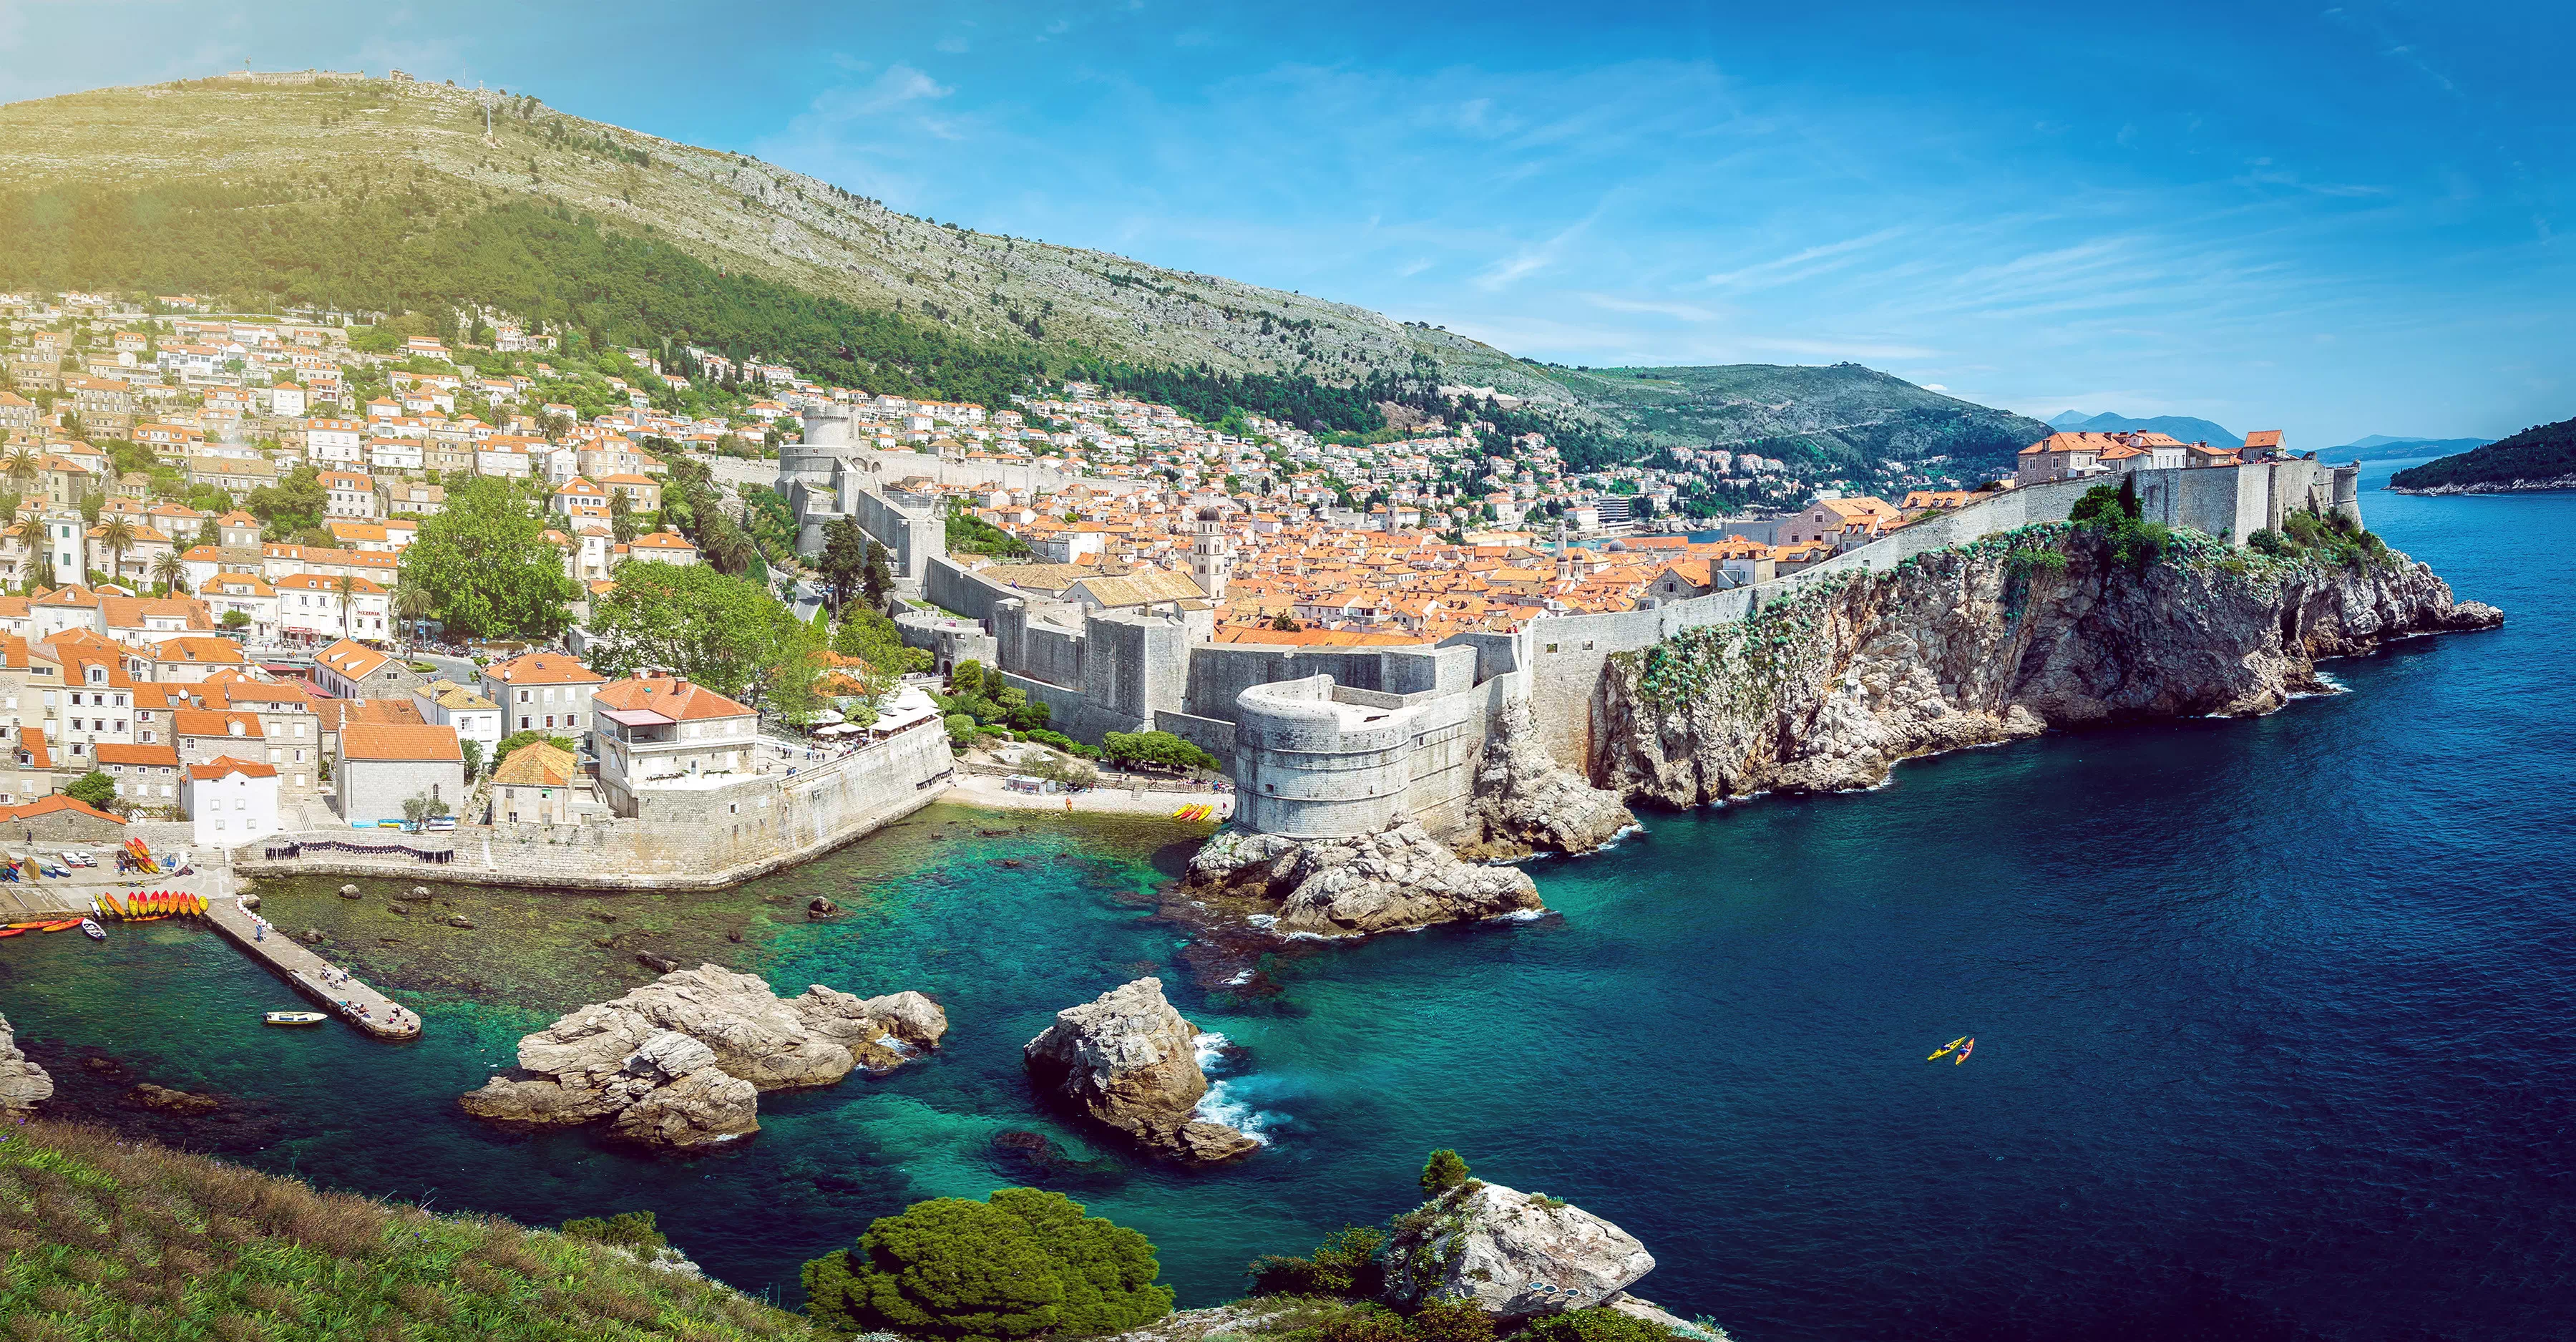 Game of Thrones Session WALLS OF DUBROVNIK